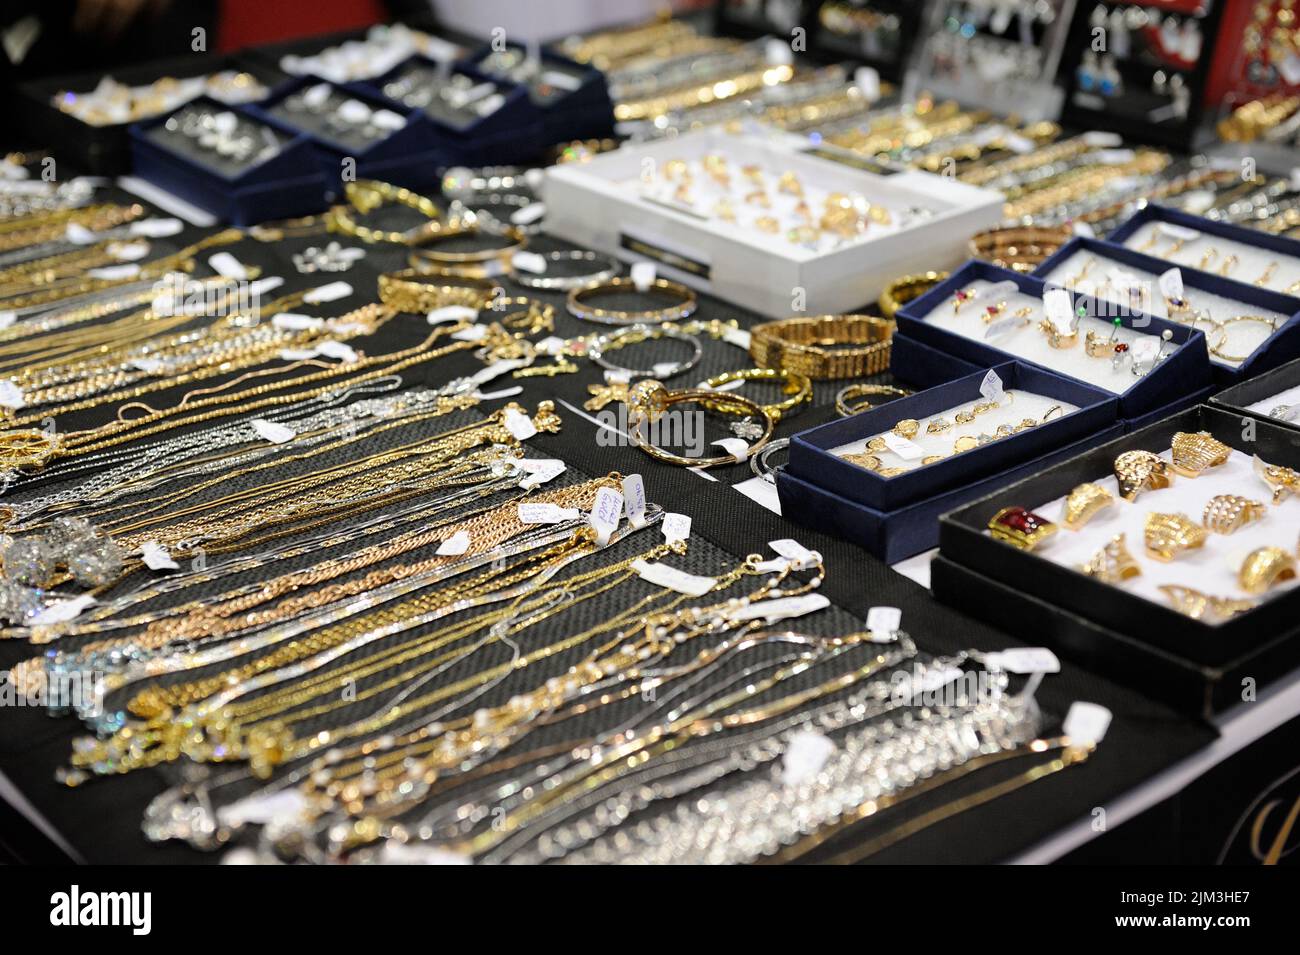 A variety of golden jewels under a glass display at a market Stock Photo